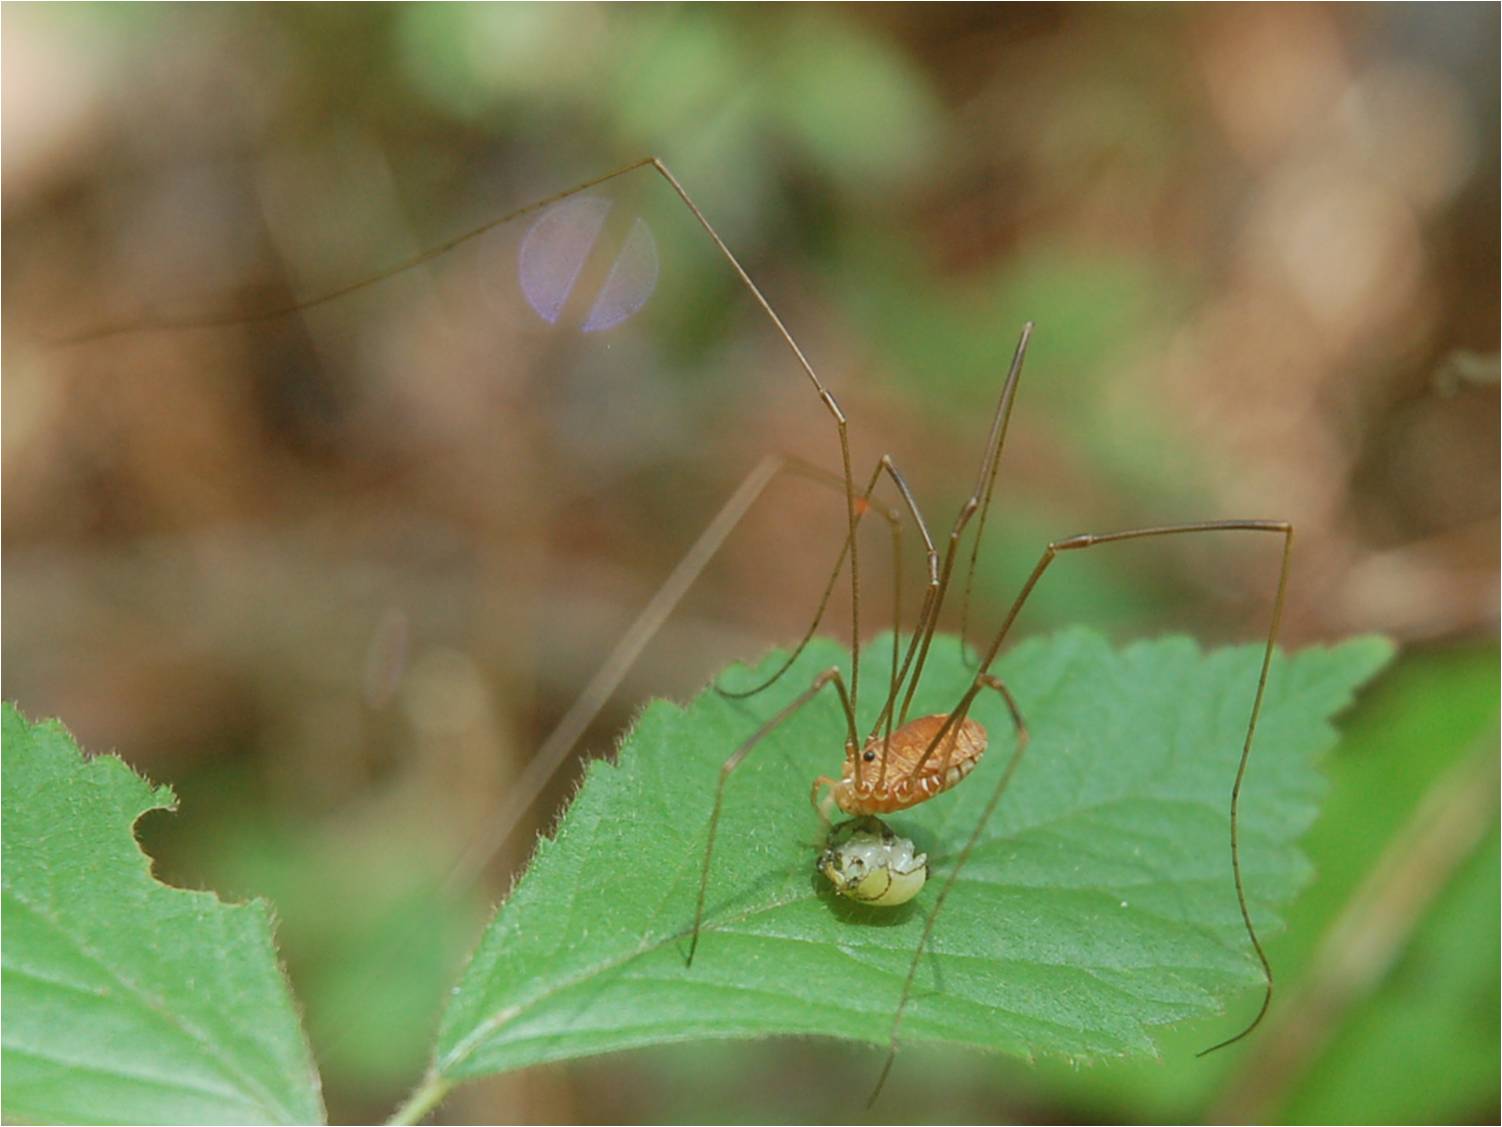 Harvestman eating an insect at ECWA's Glennstone preserve